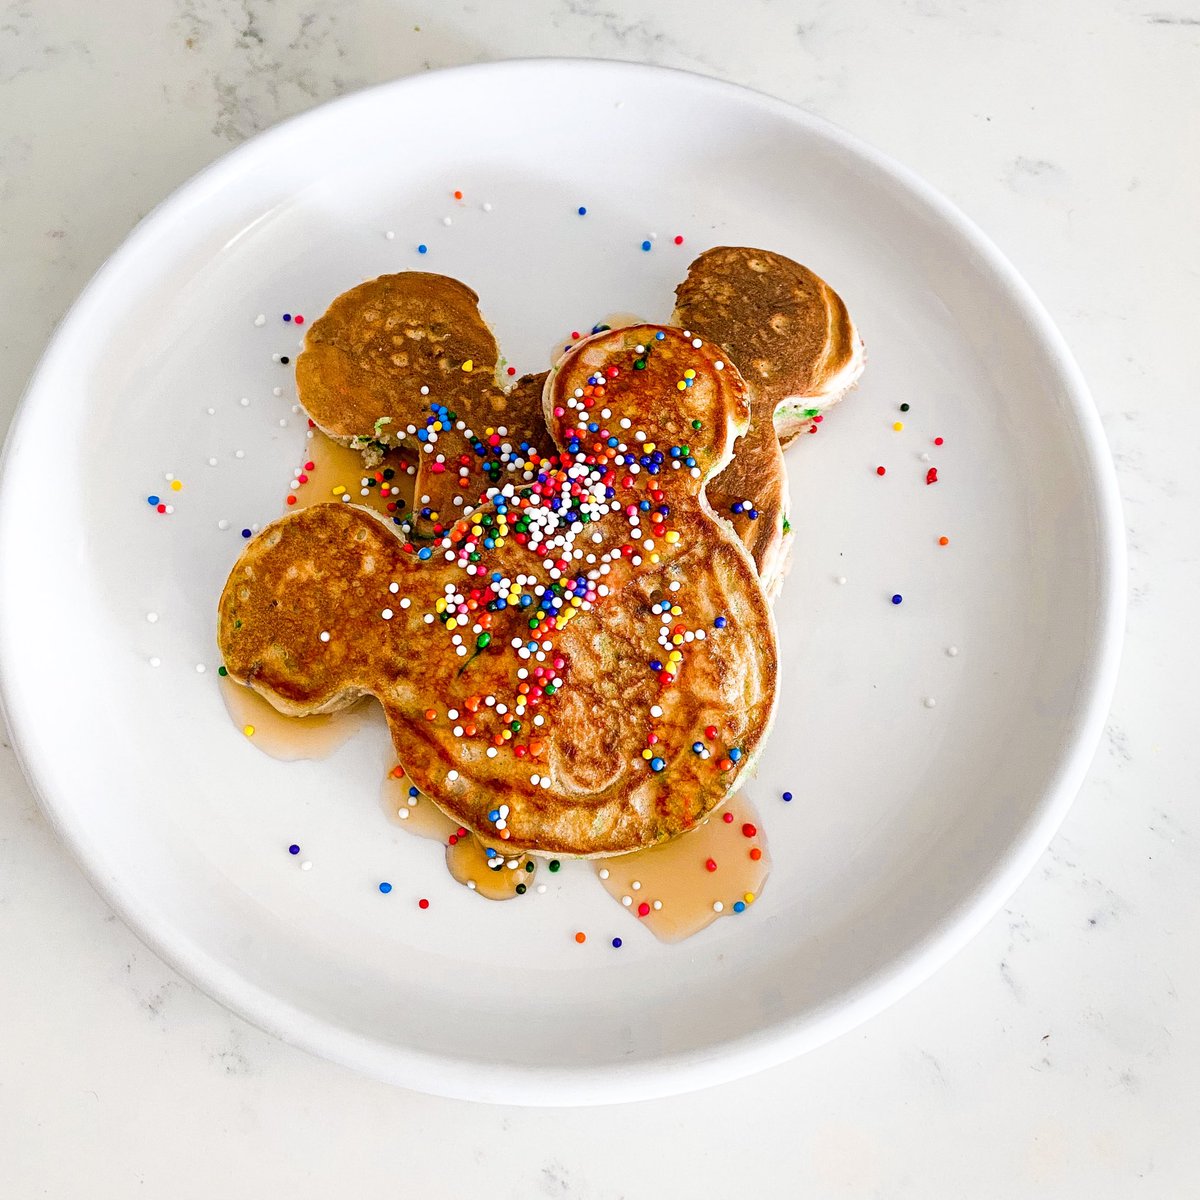 Now available at the PARTY TIME booth.  Mickey Celebration pancakes with crunchy rainbow sprinkles.